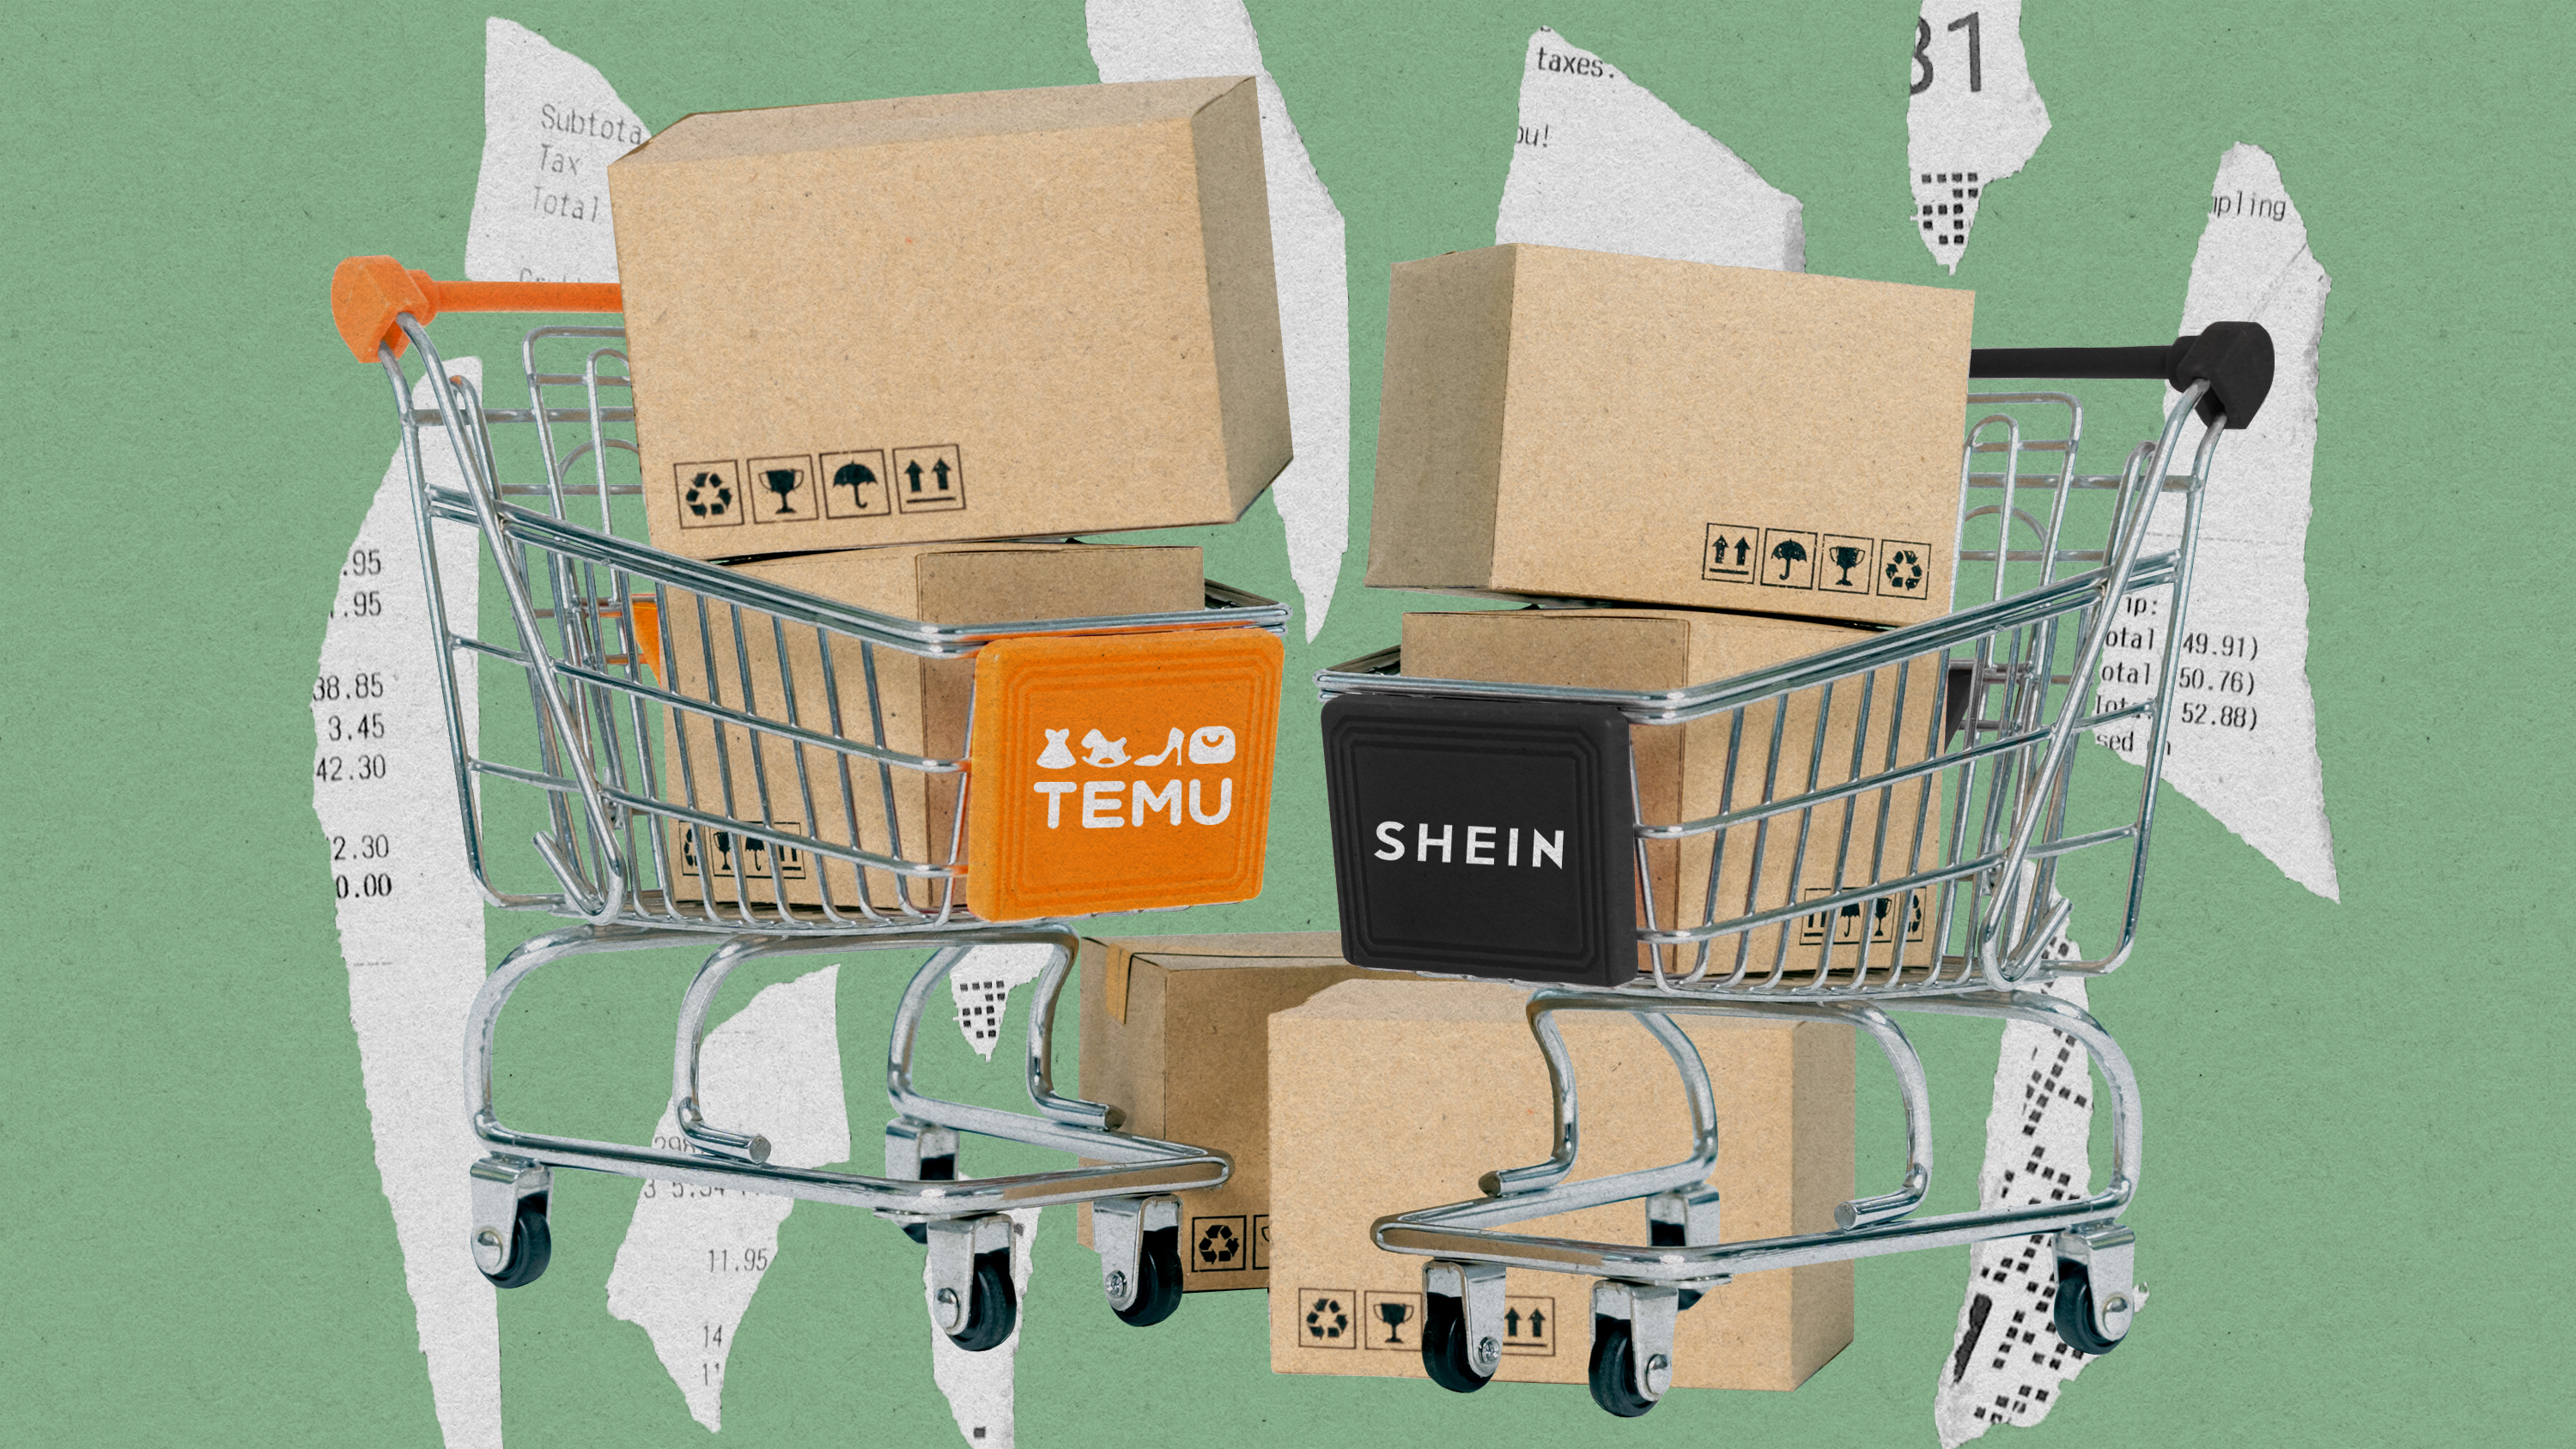 Illustration showcasing shopping carts labeled &quot;TEMU&quot; and &quot;Shein&quot;, filled with boxes, facing off.